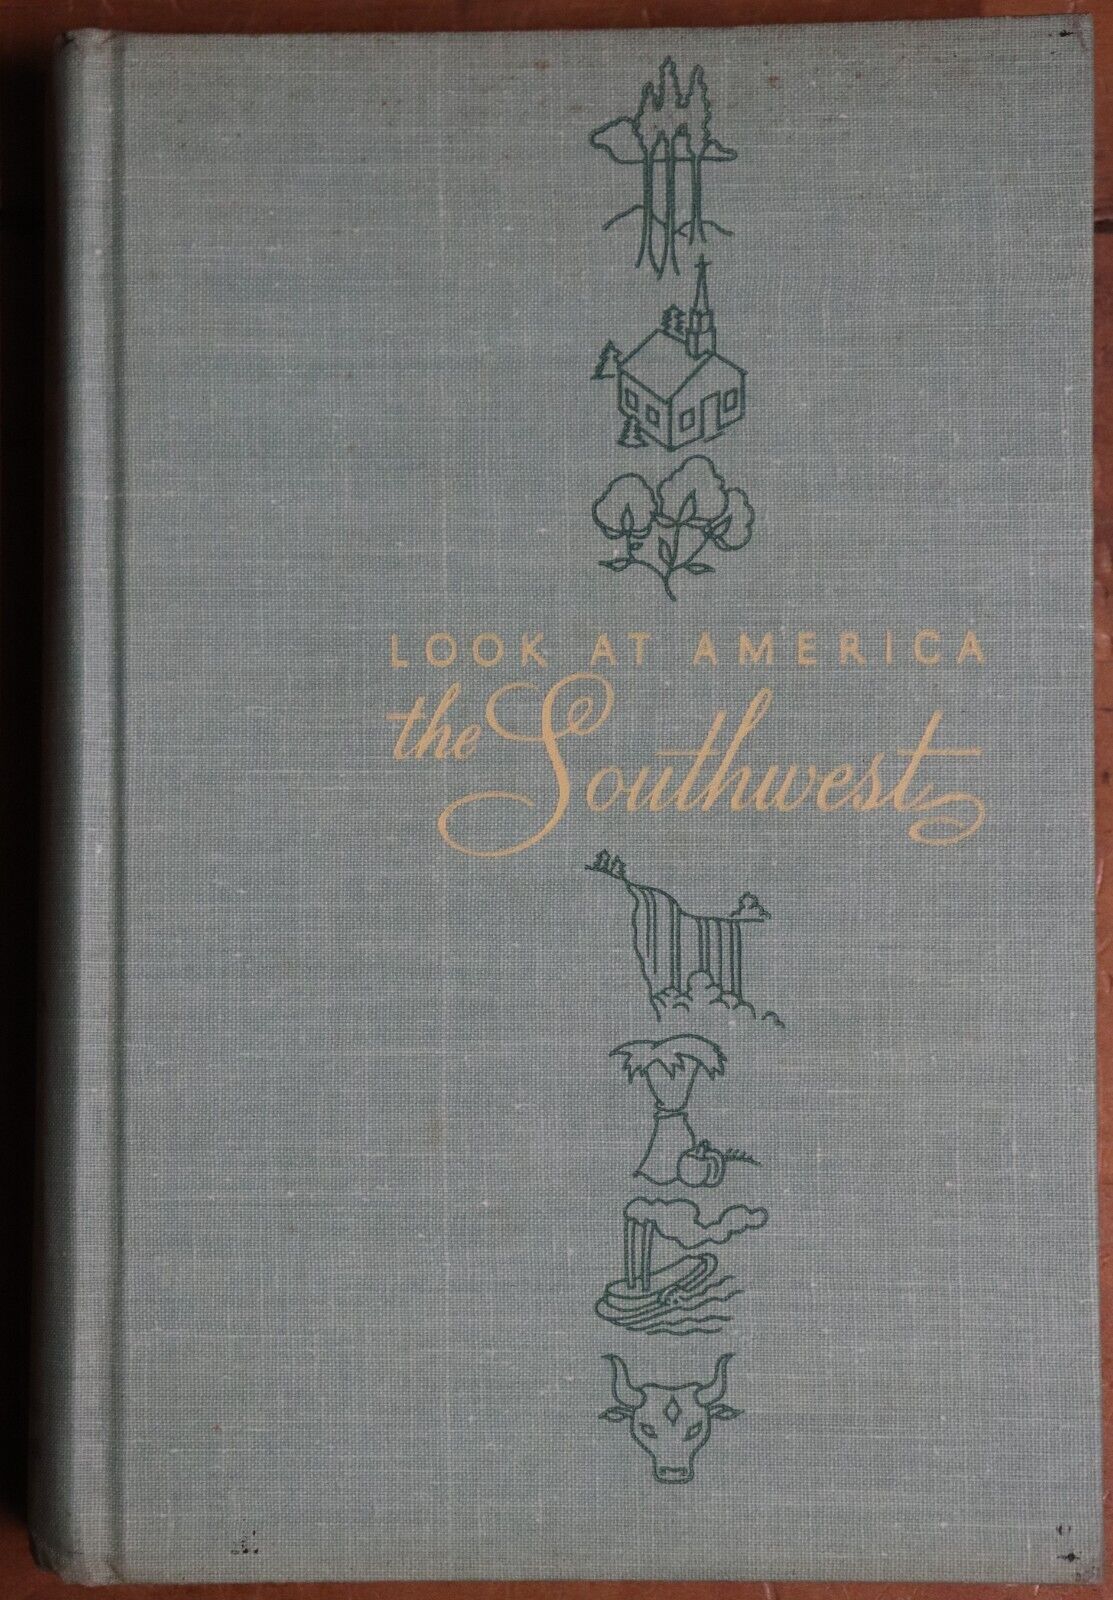 Look at America: The Southwest - 1947 - 1st Edition Vintage Book